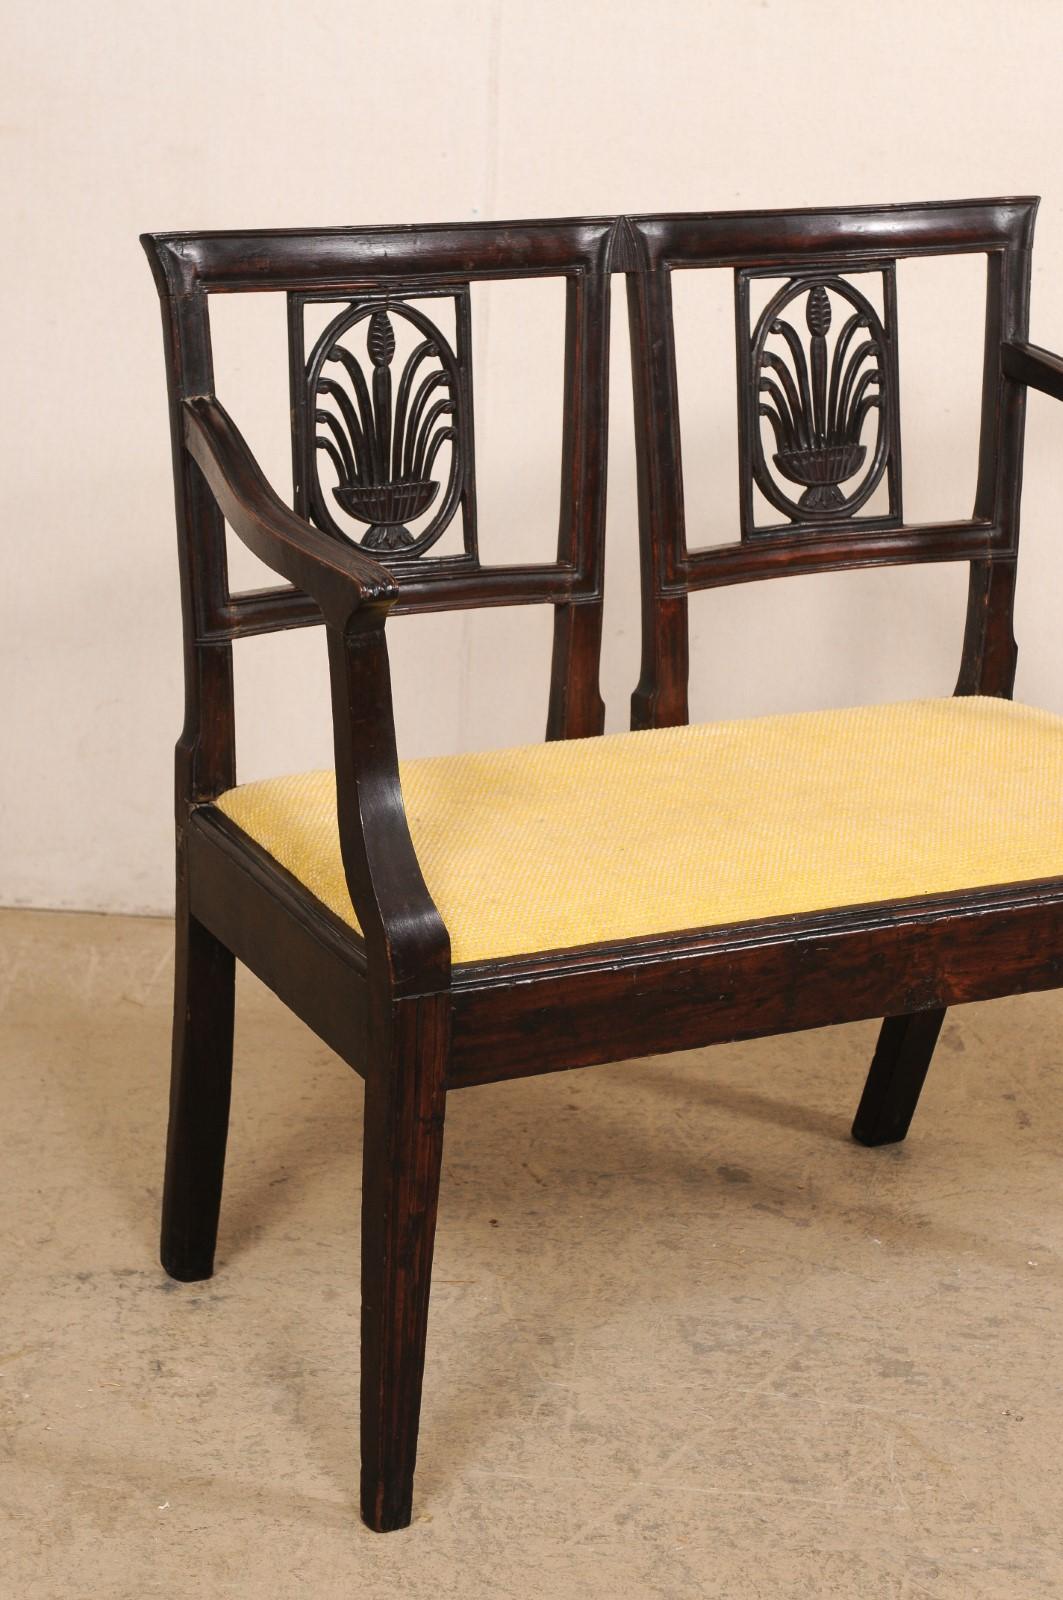 19th Century Italian Neoclassic Two-Seat Chair Settee, Late 18th C. For Sale